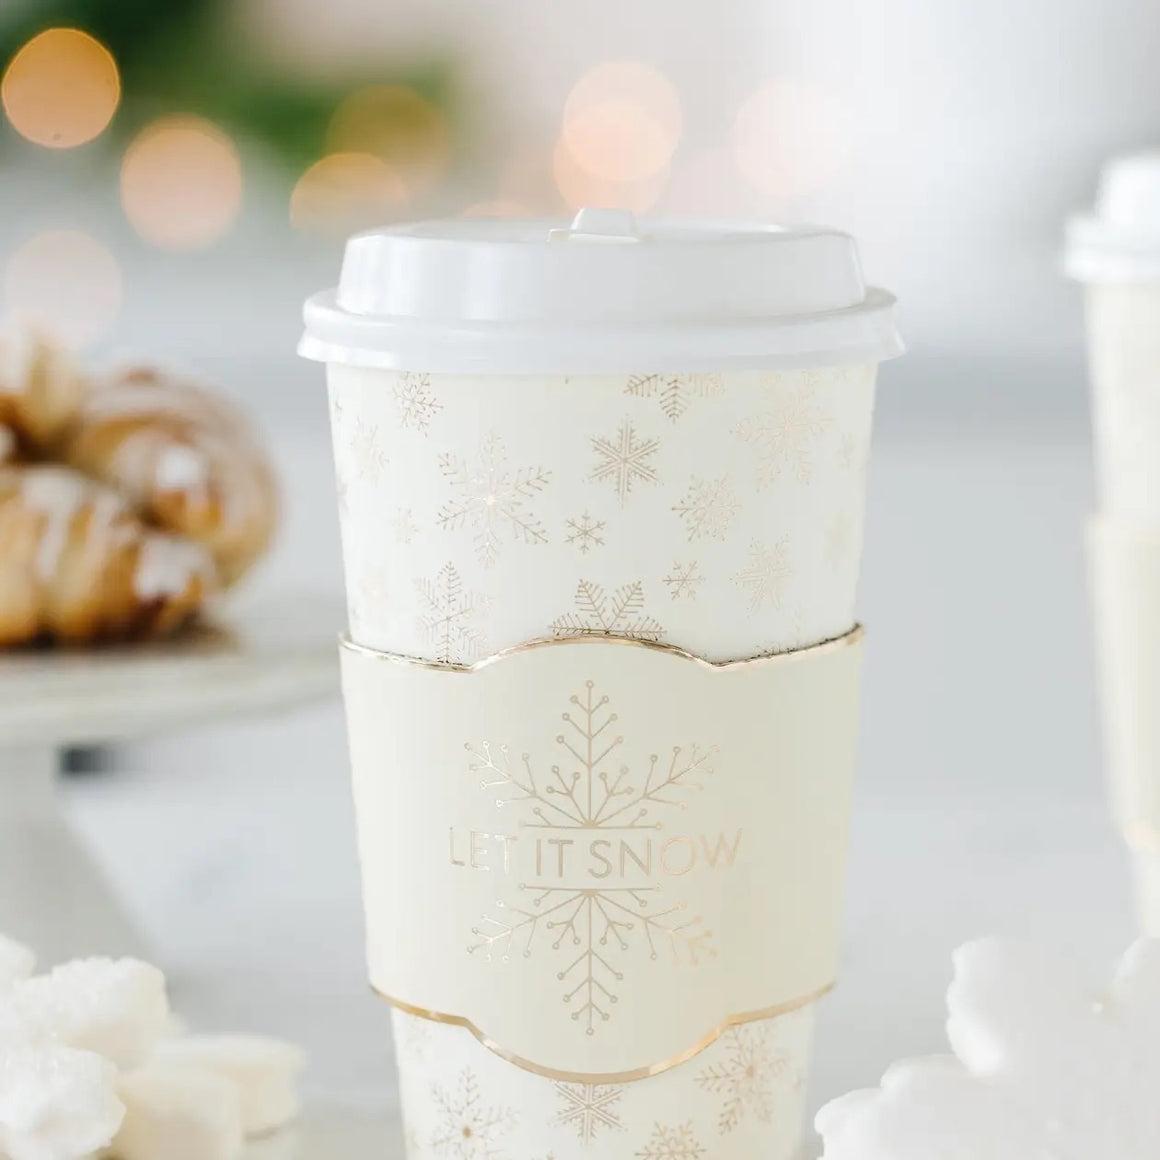 TO-GO COZY CUPS - CHRISTMAS GLAM GOLD + CREAM LET IT SNOW